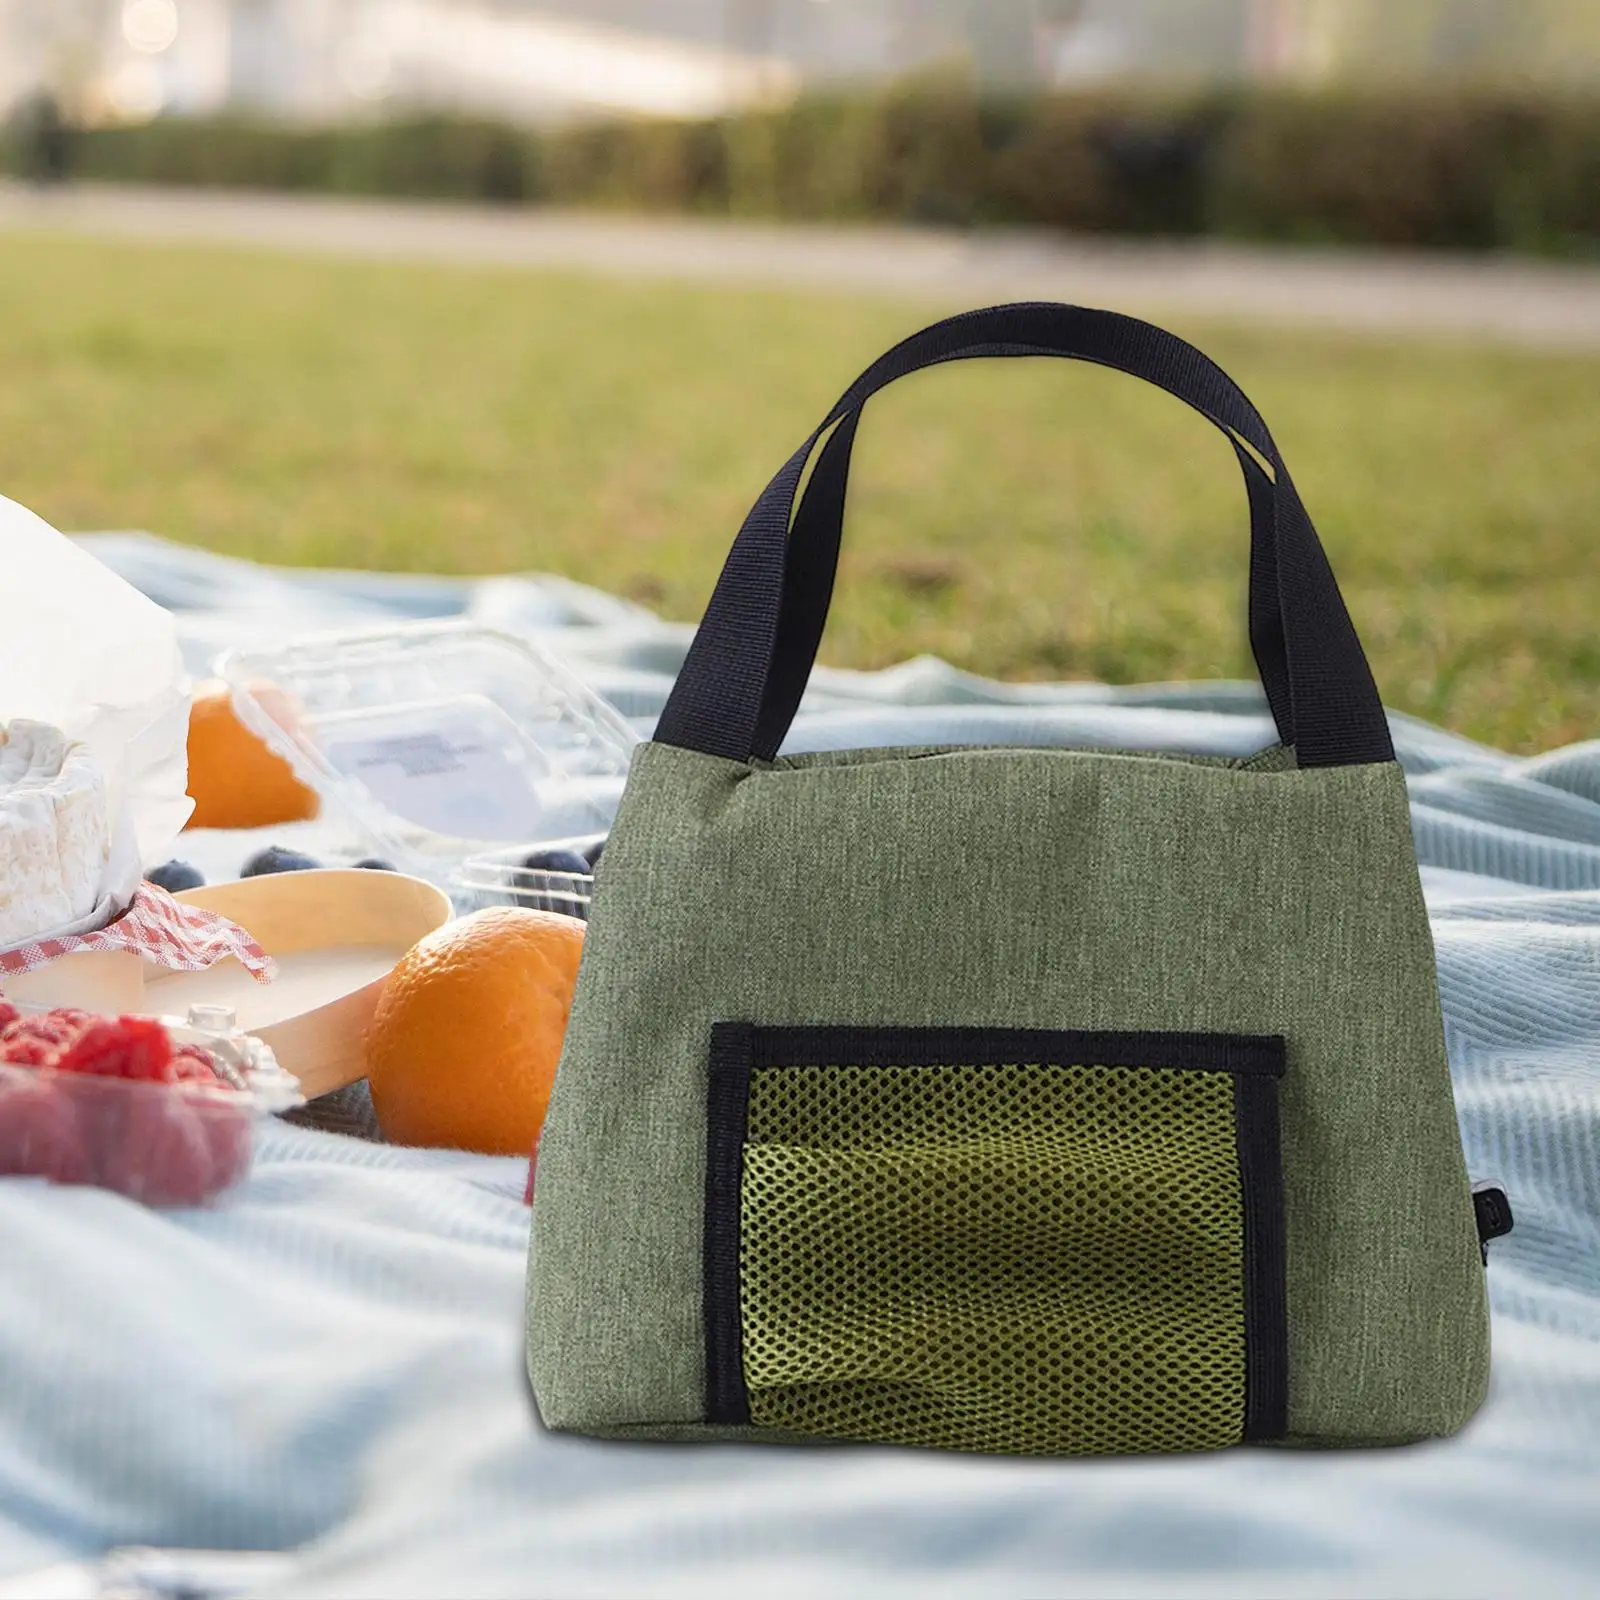 Lunch Bag Lunch Box Reusable with USB Ports Food Carrier for Cooking Office Picnic Travel